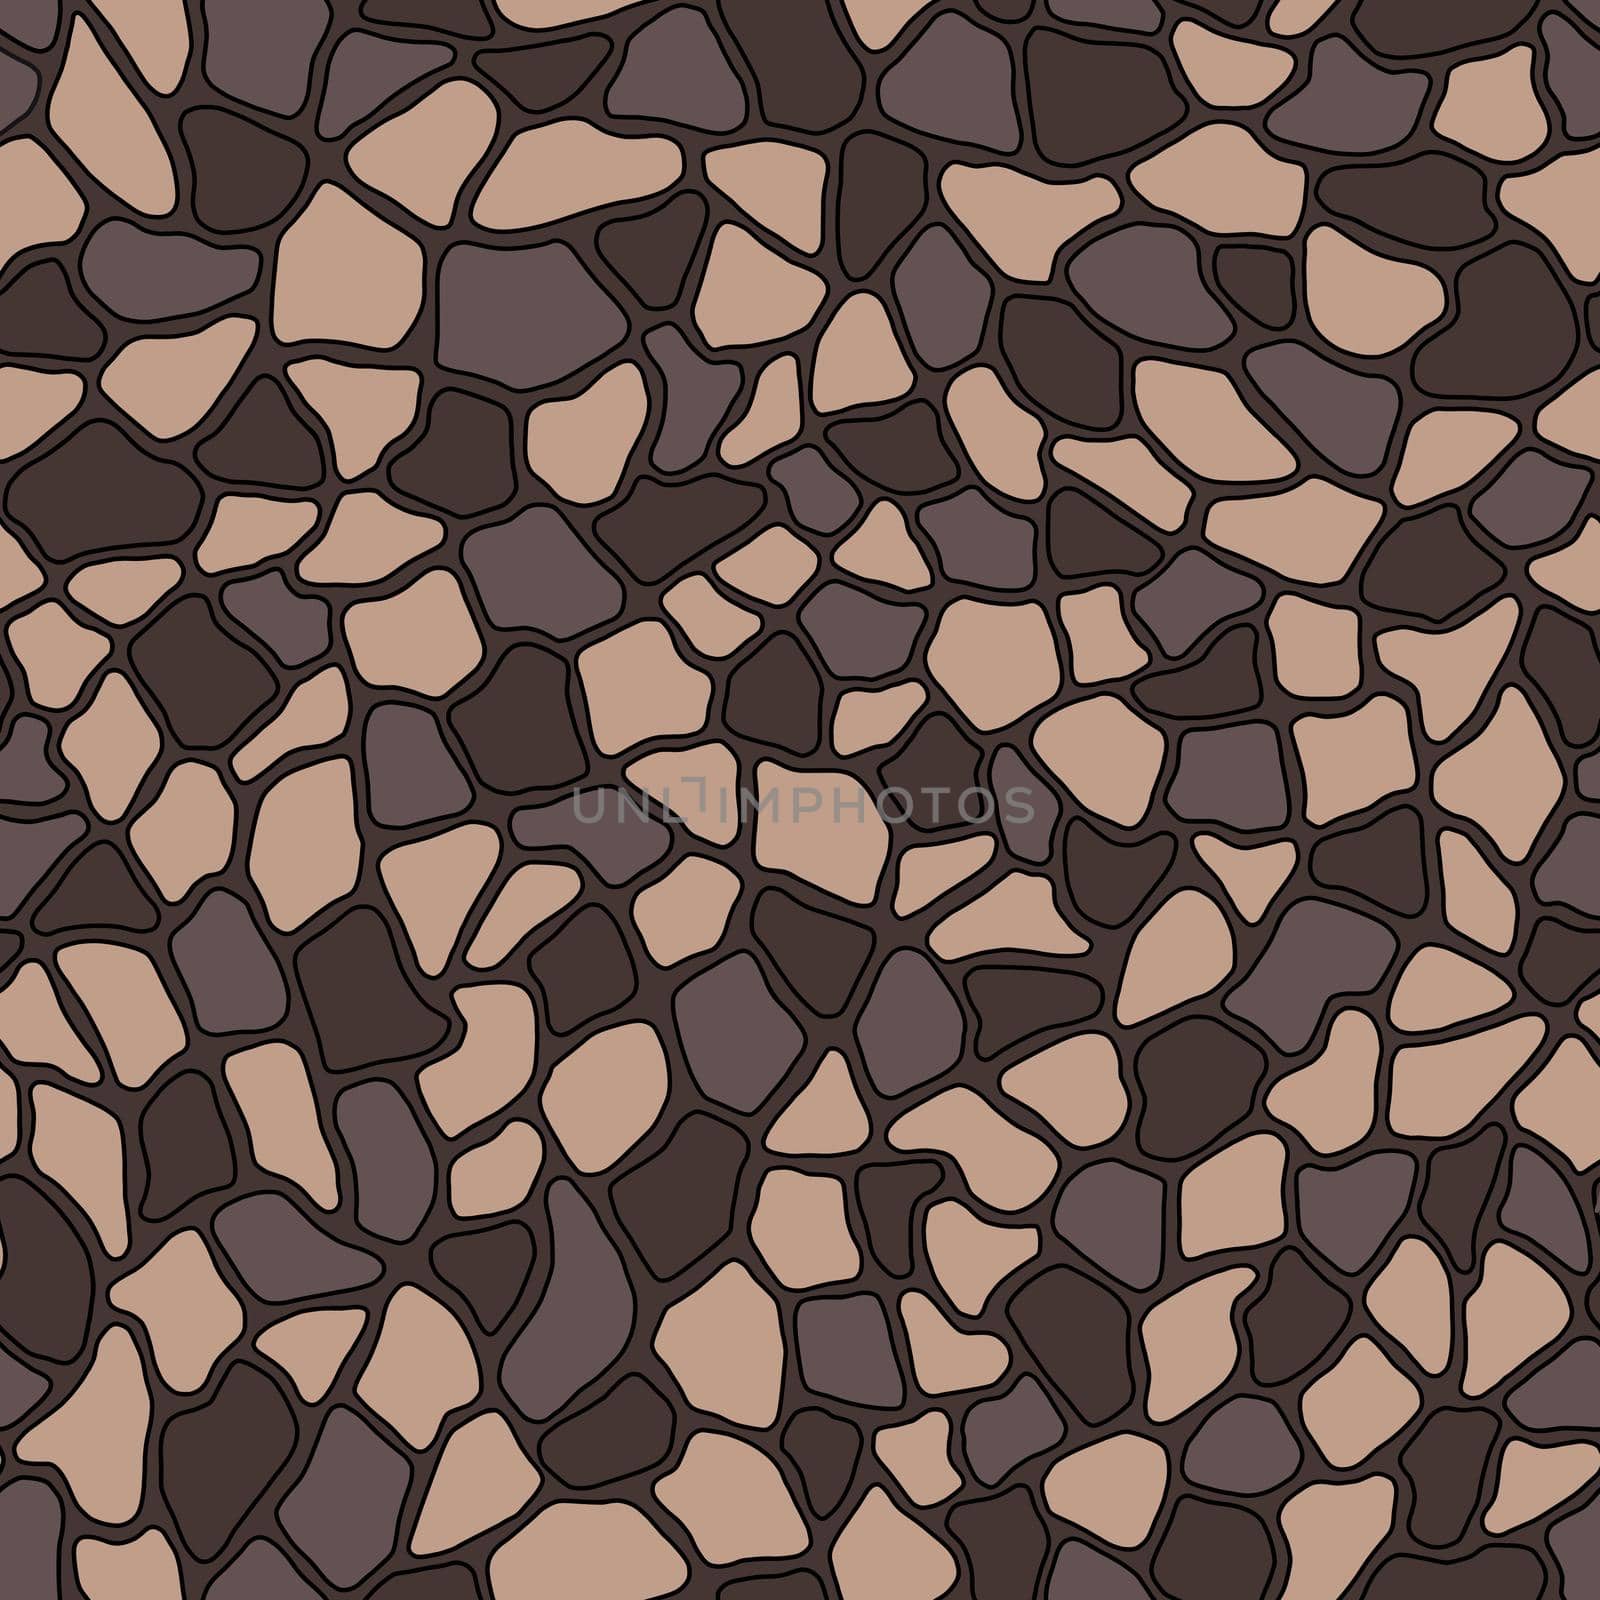 Terrazzo modern trendy colorful seamless pattern.Abstract creative backdrop with chaotic small pieces irregular shapes. Ideal for wrapping paper,textile,print,wallpaper,terrazzo flooring.Brown, beige.